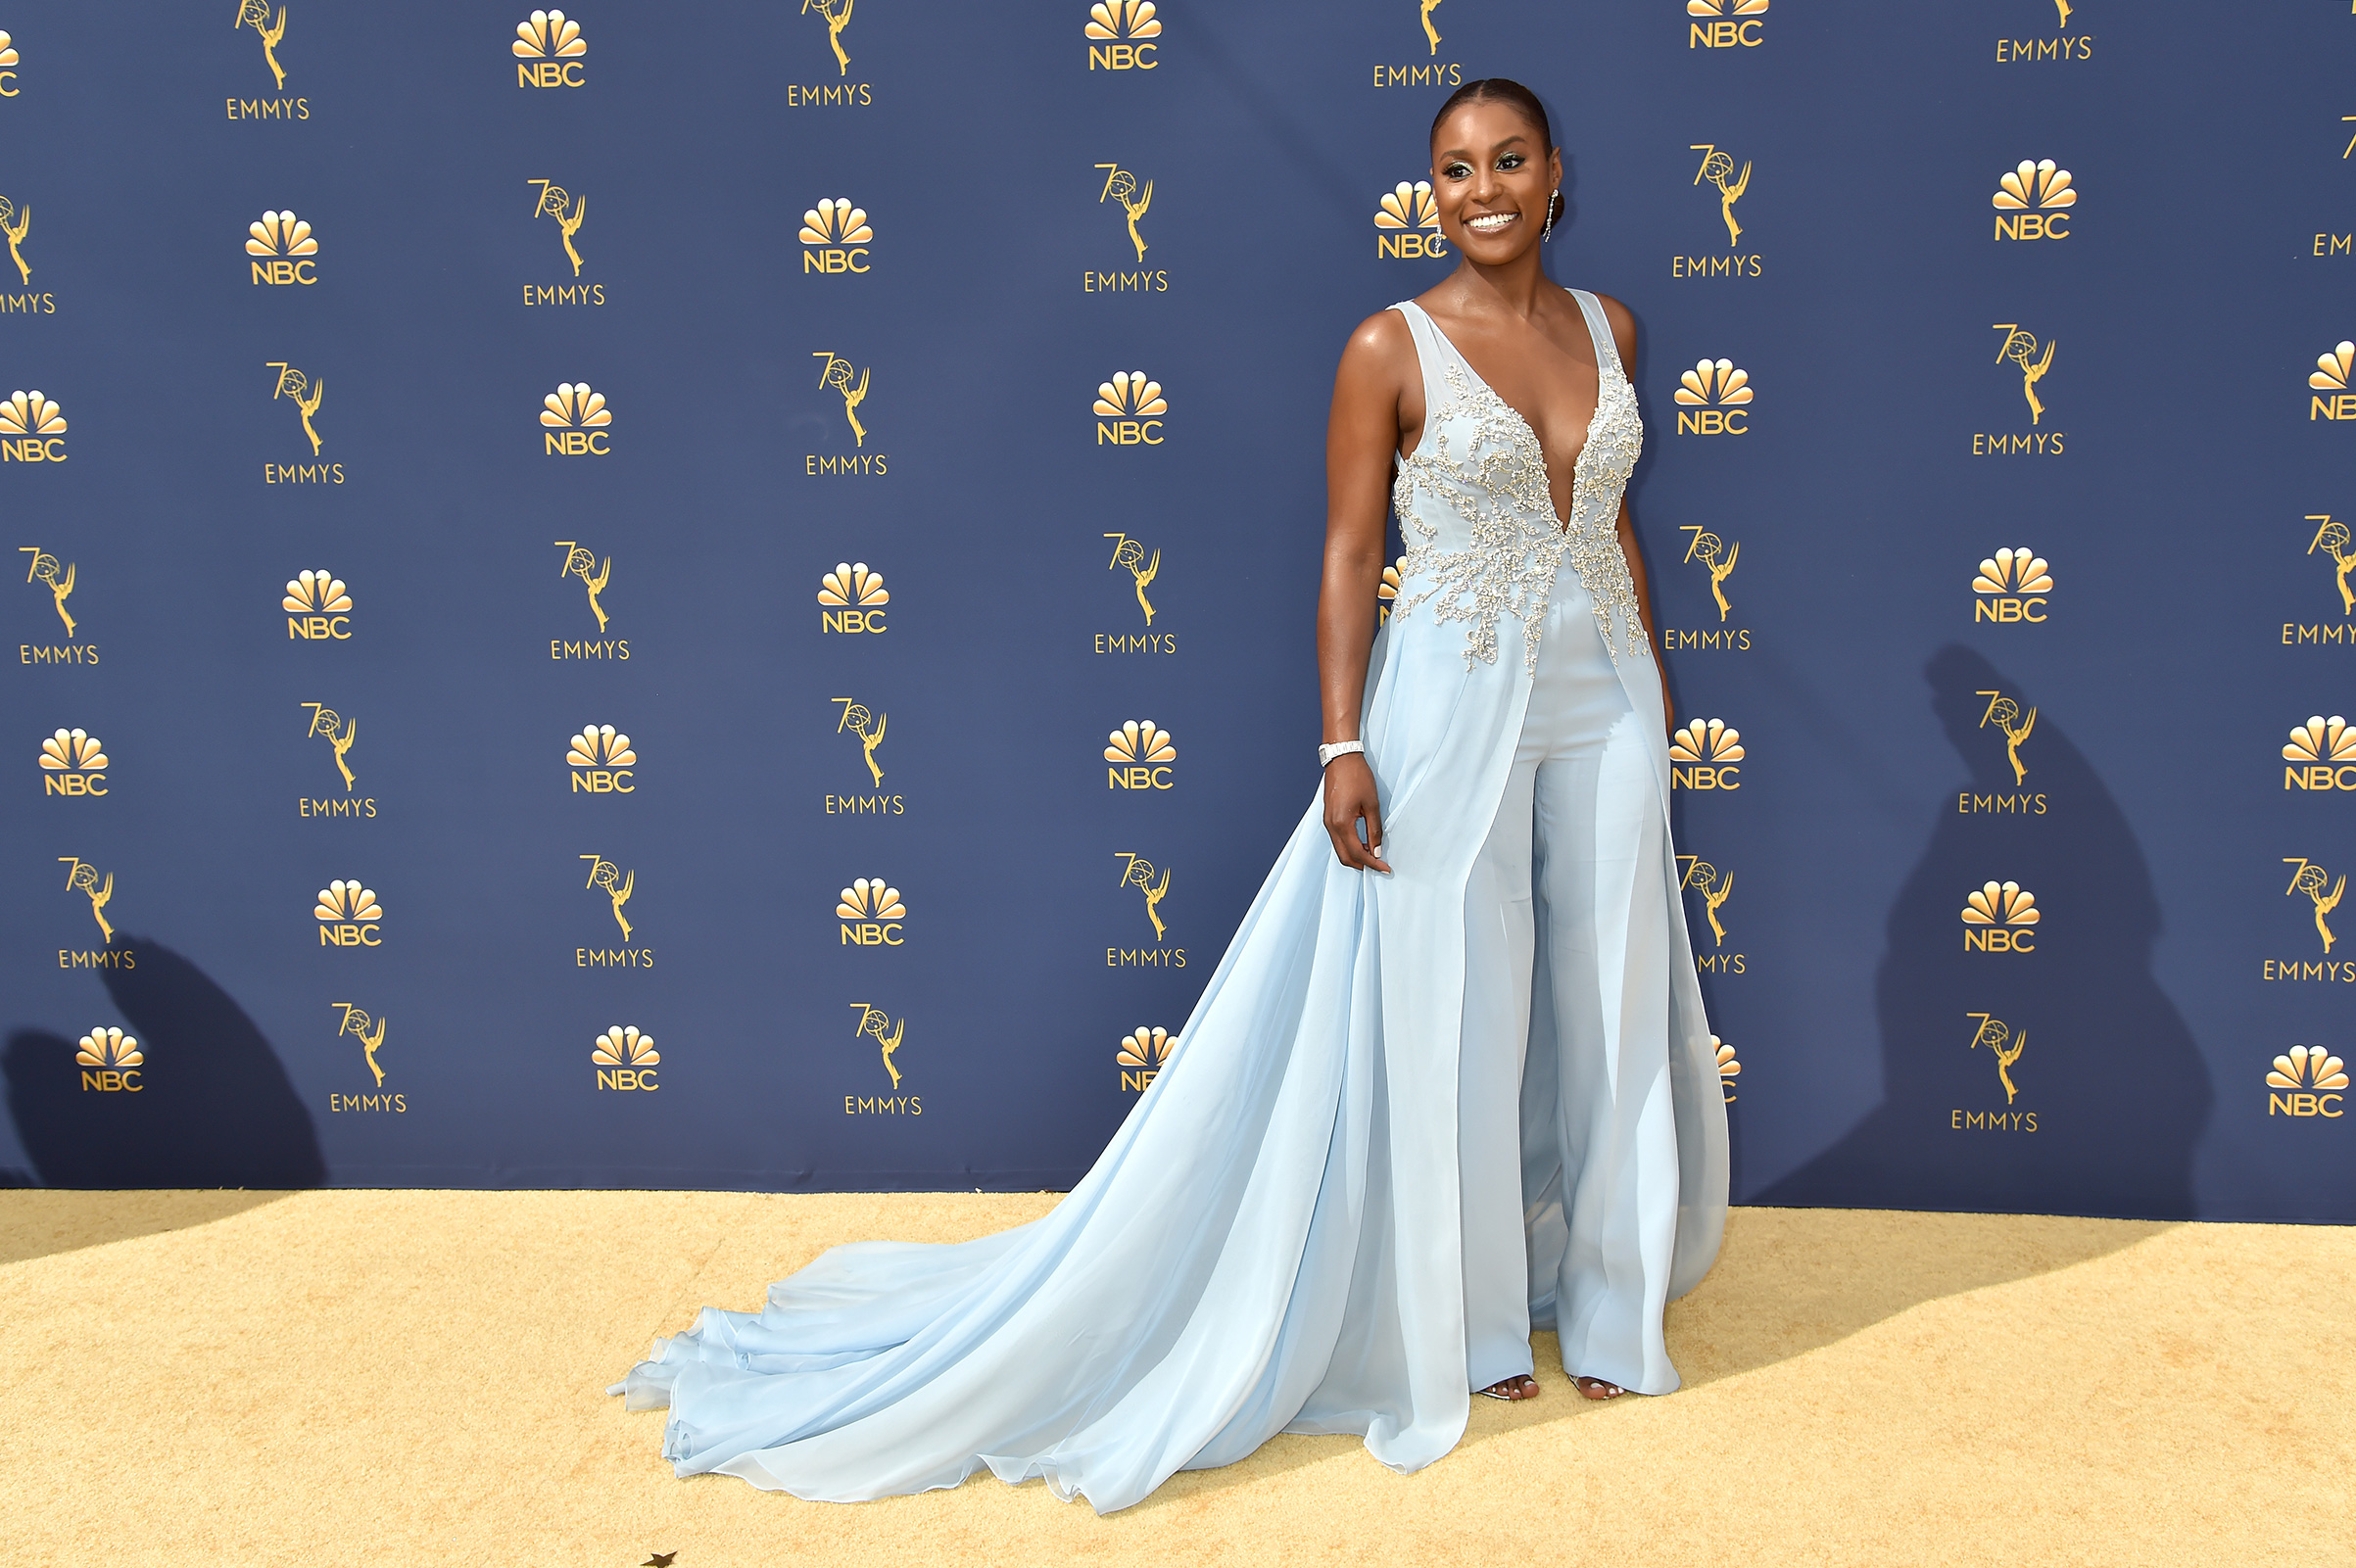 Issa Rae attends the 70th Emmy Awards on Sept. 17. (Jeff Kravitz—FilmMagic/Getty Images)